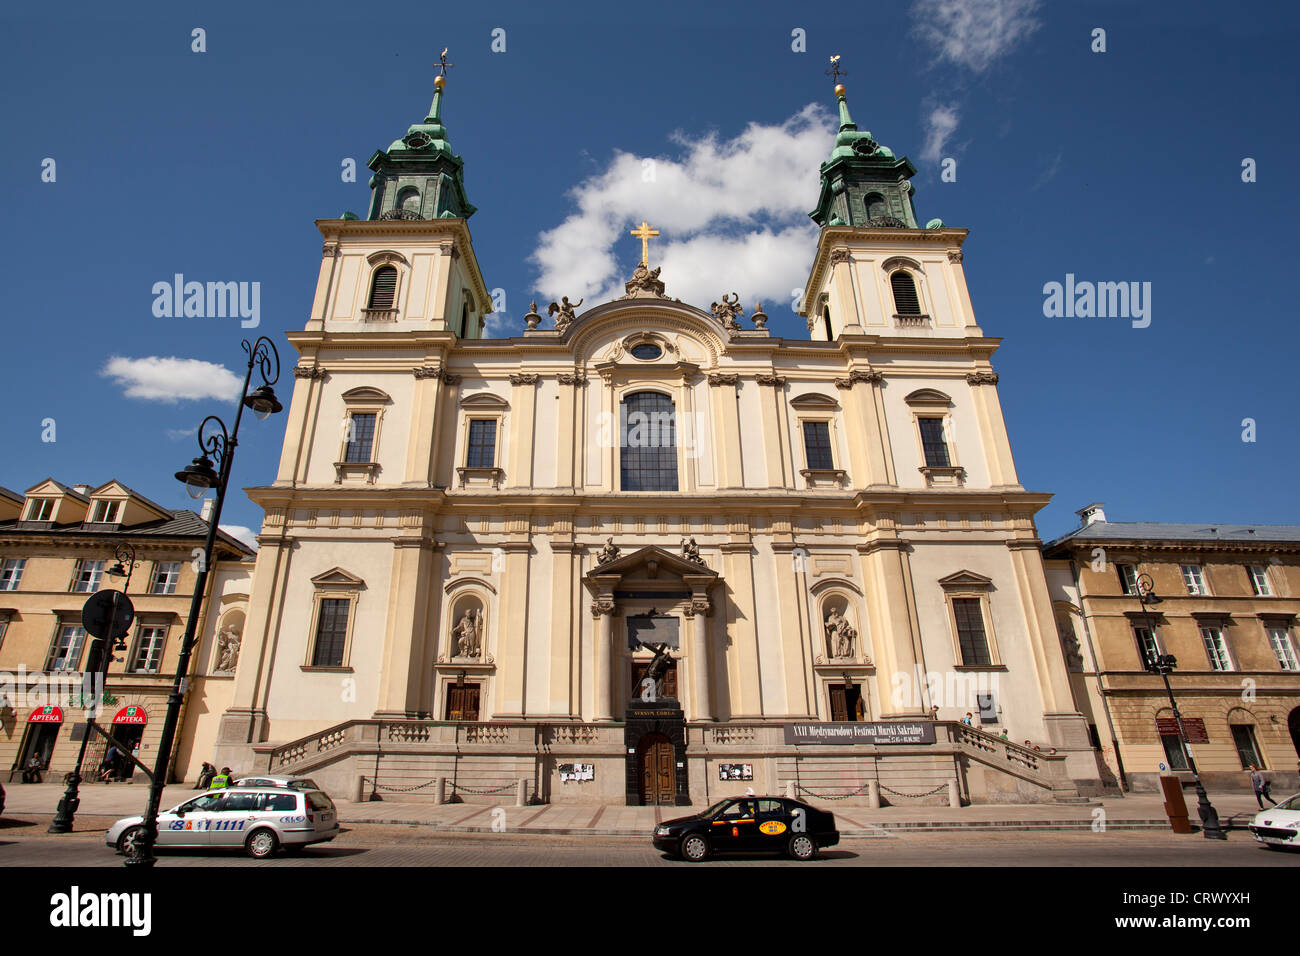 The Church of the Holy Cross, Warsaw, Poland. Stock Photo